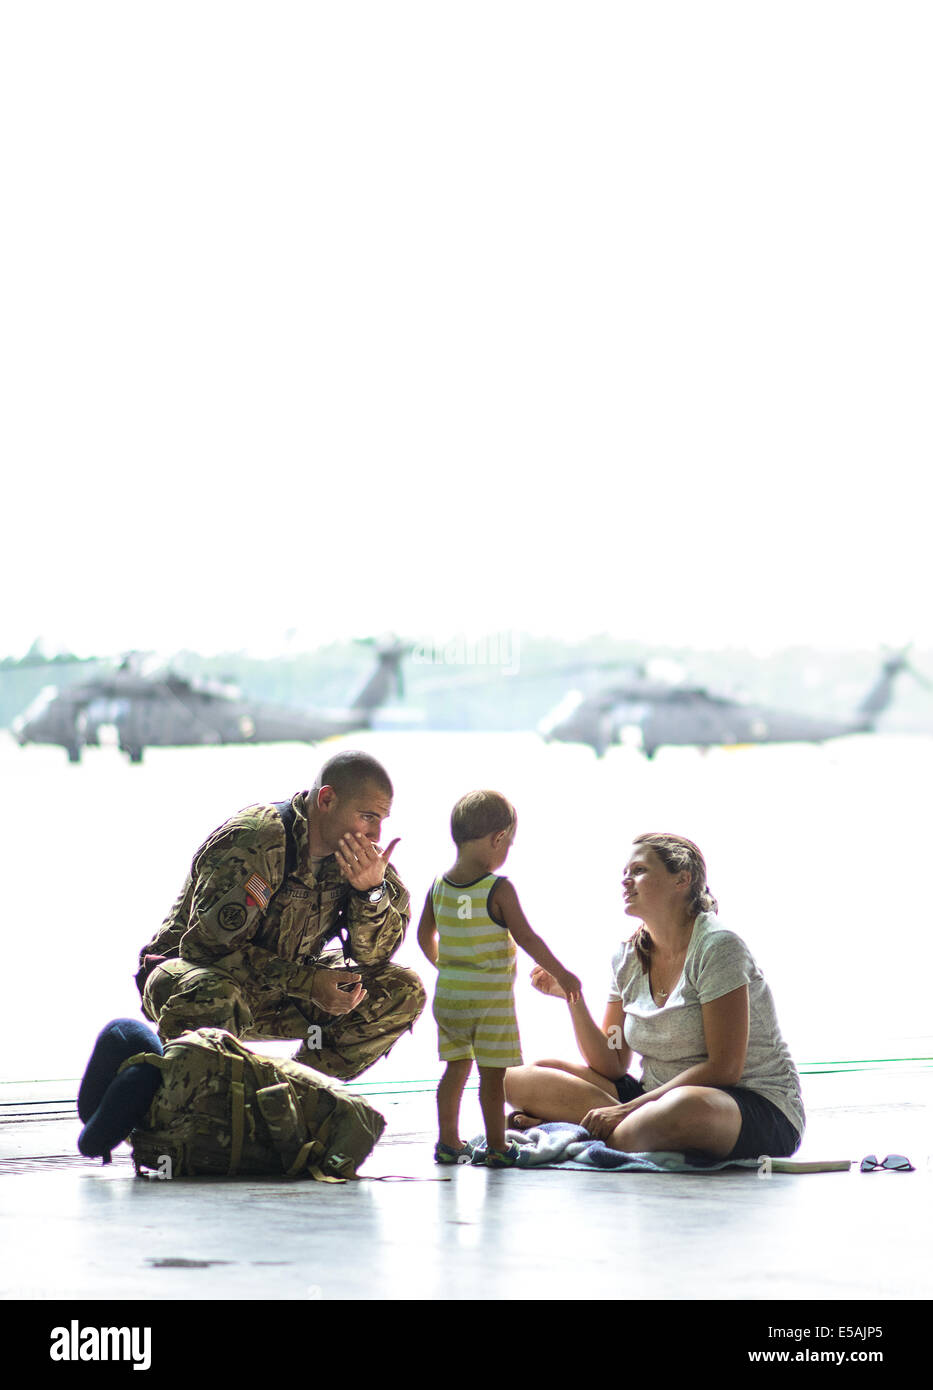 July 24, 2014 - Fort Bragg, NC, USA - July 24, 2014 - Fort Bragg, N.C., USA - Warrant Officer Casey Matullo spends sometime with his wife, Kristen, and his son, Gabriel, 2, Thursday, July 24, 2014, on Fort Bragg, N.C., before he and his fellow soldiers from Company C, 3rd General Support Aviation Battalion, 82nd Combat Aviation Brigade, deploy to Afghanistan for nine months. (Credit Image: © Andrew Craft/ZUMA Wire/ZUMAPRESS.com) Stock Photo